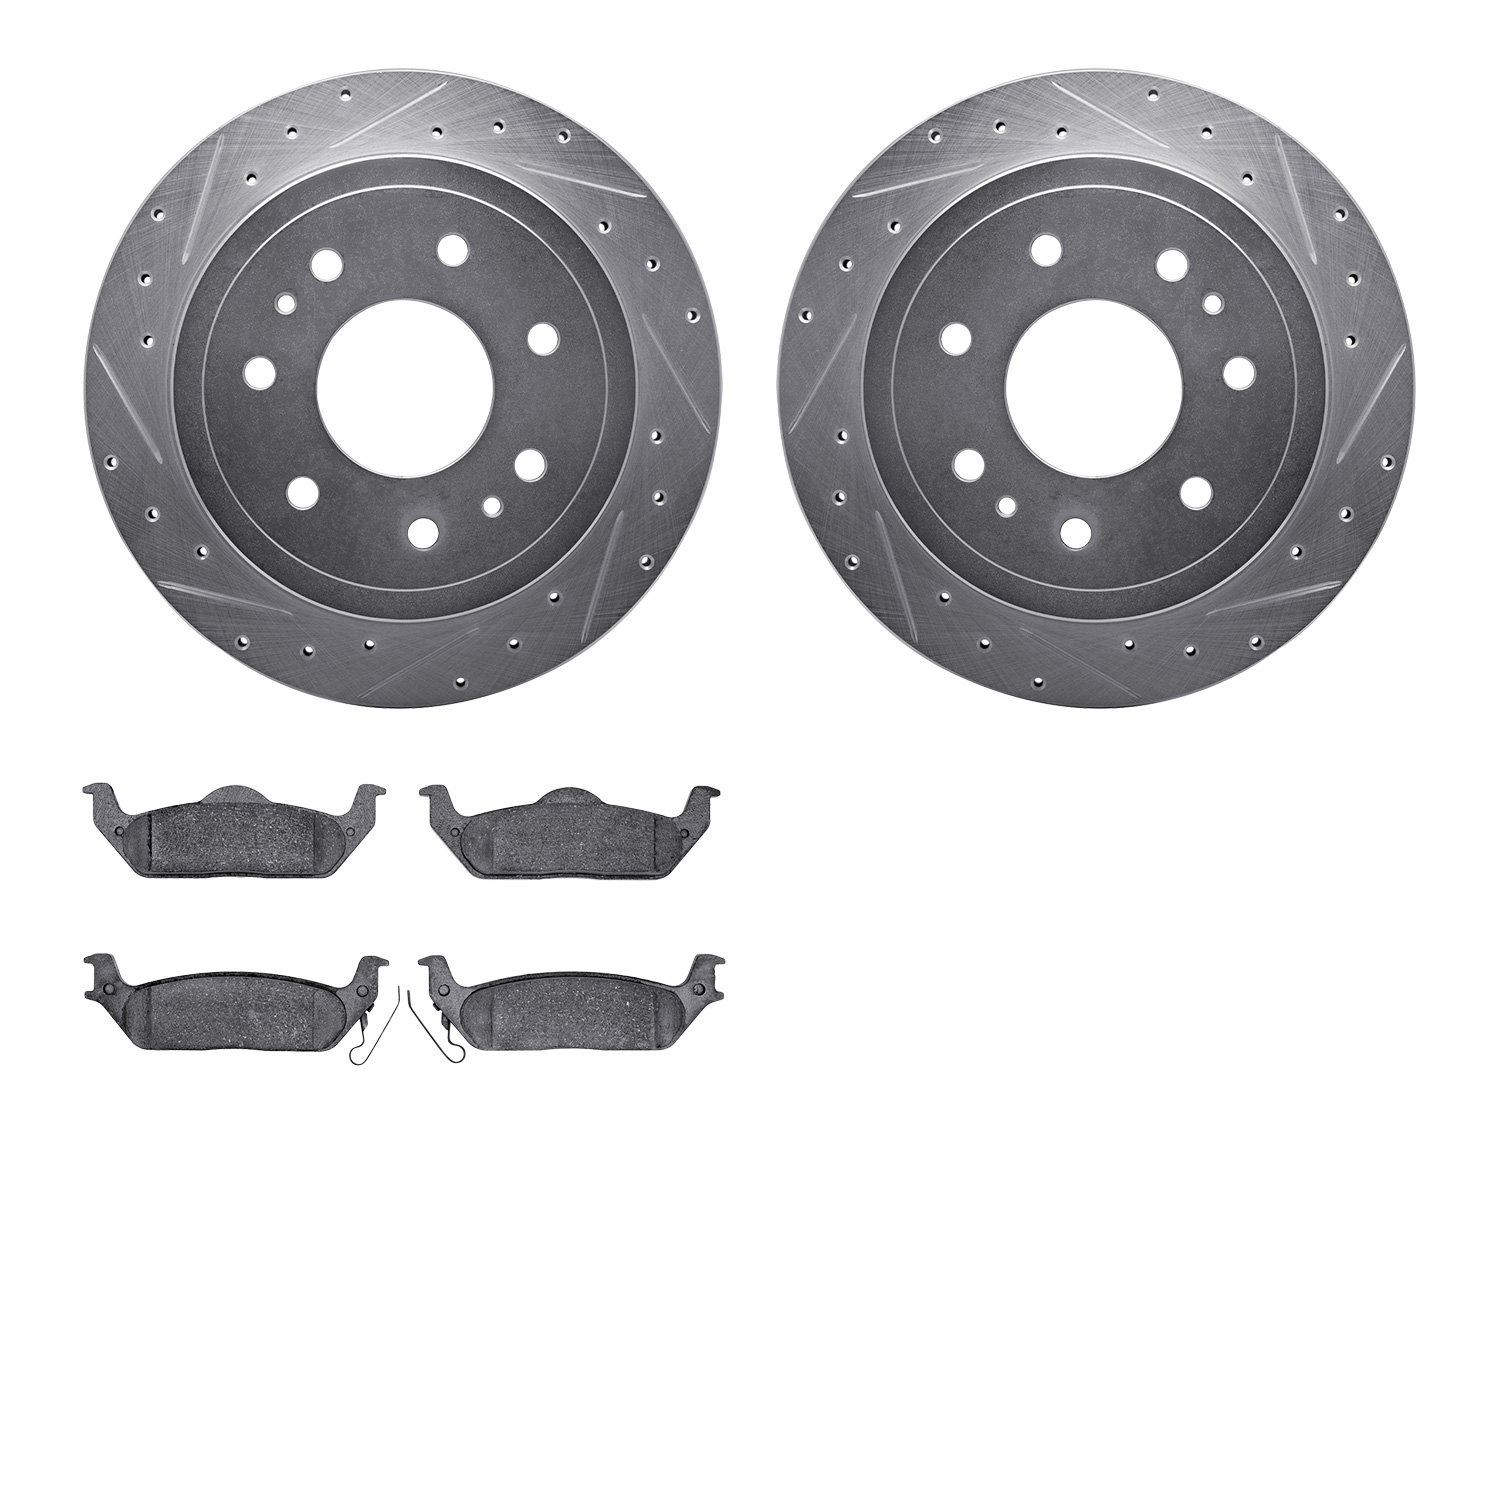 7402-54075 Drilled/Slotted Brake Rotors with Ultimate-Duty Brake Pads Kit [Silver], 2004-2011 Ford/Lincoln/Mercury/Mazda, Positi